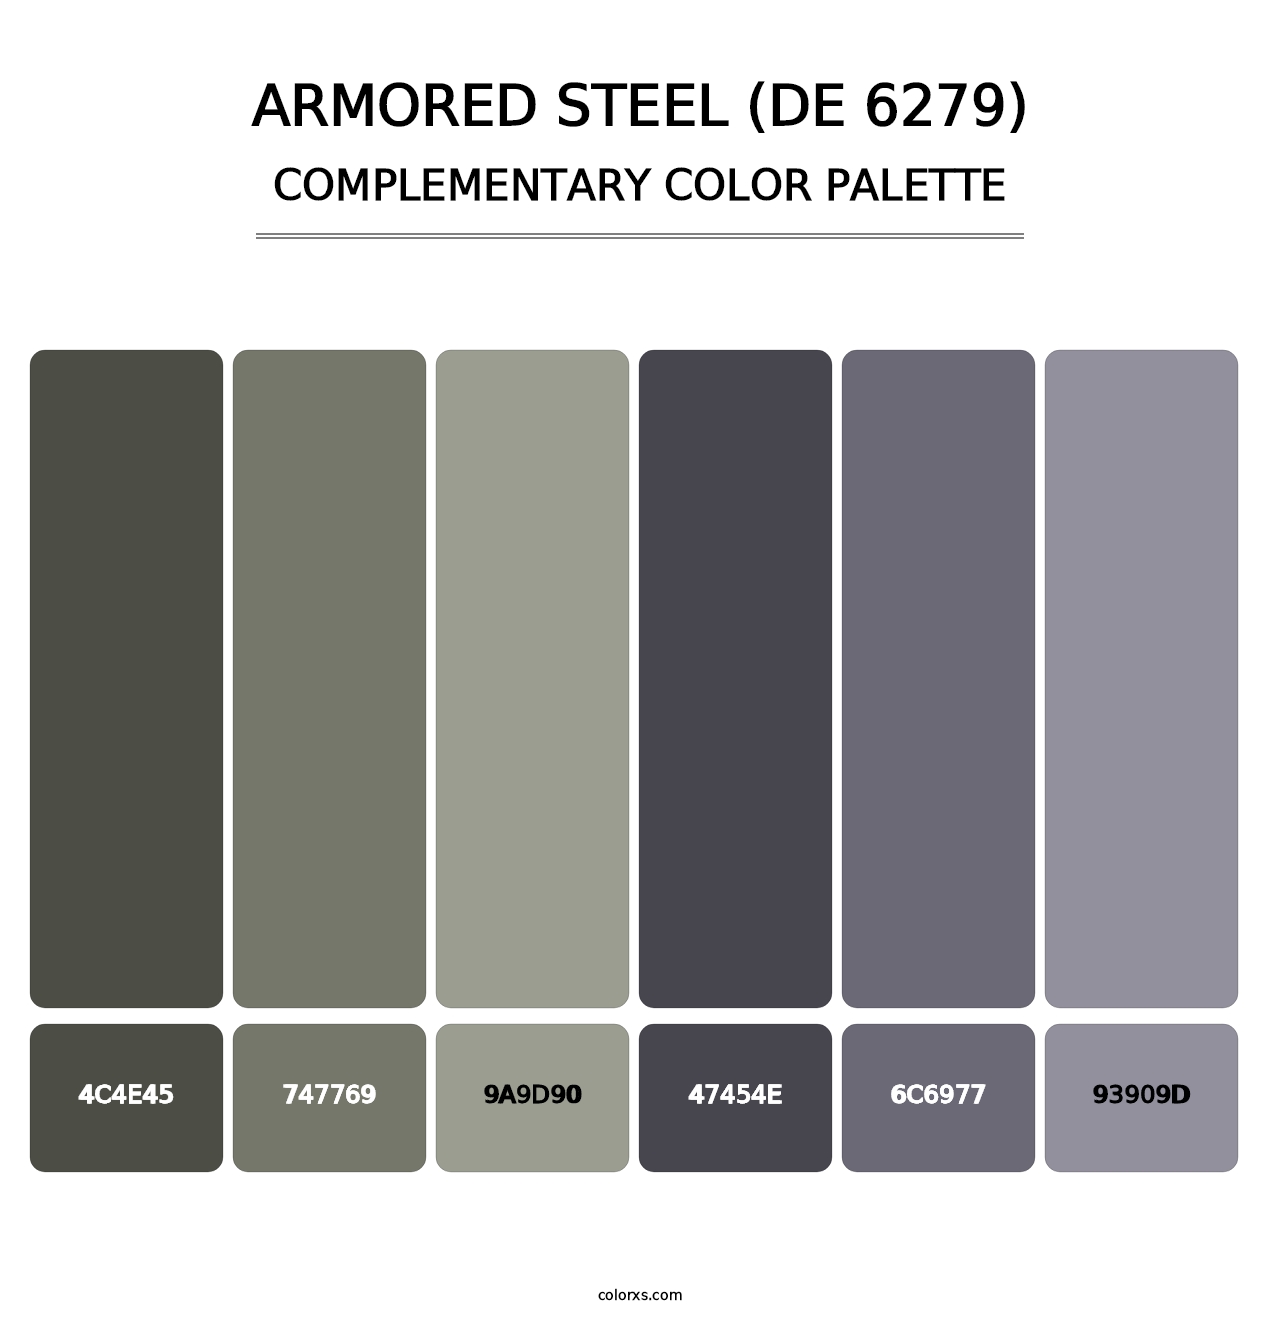 Armored Steel (DE 6279) - Complementary Color Palette